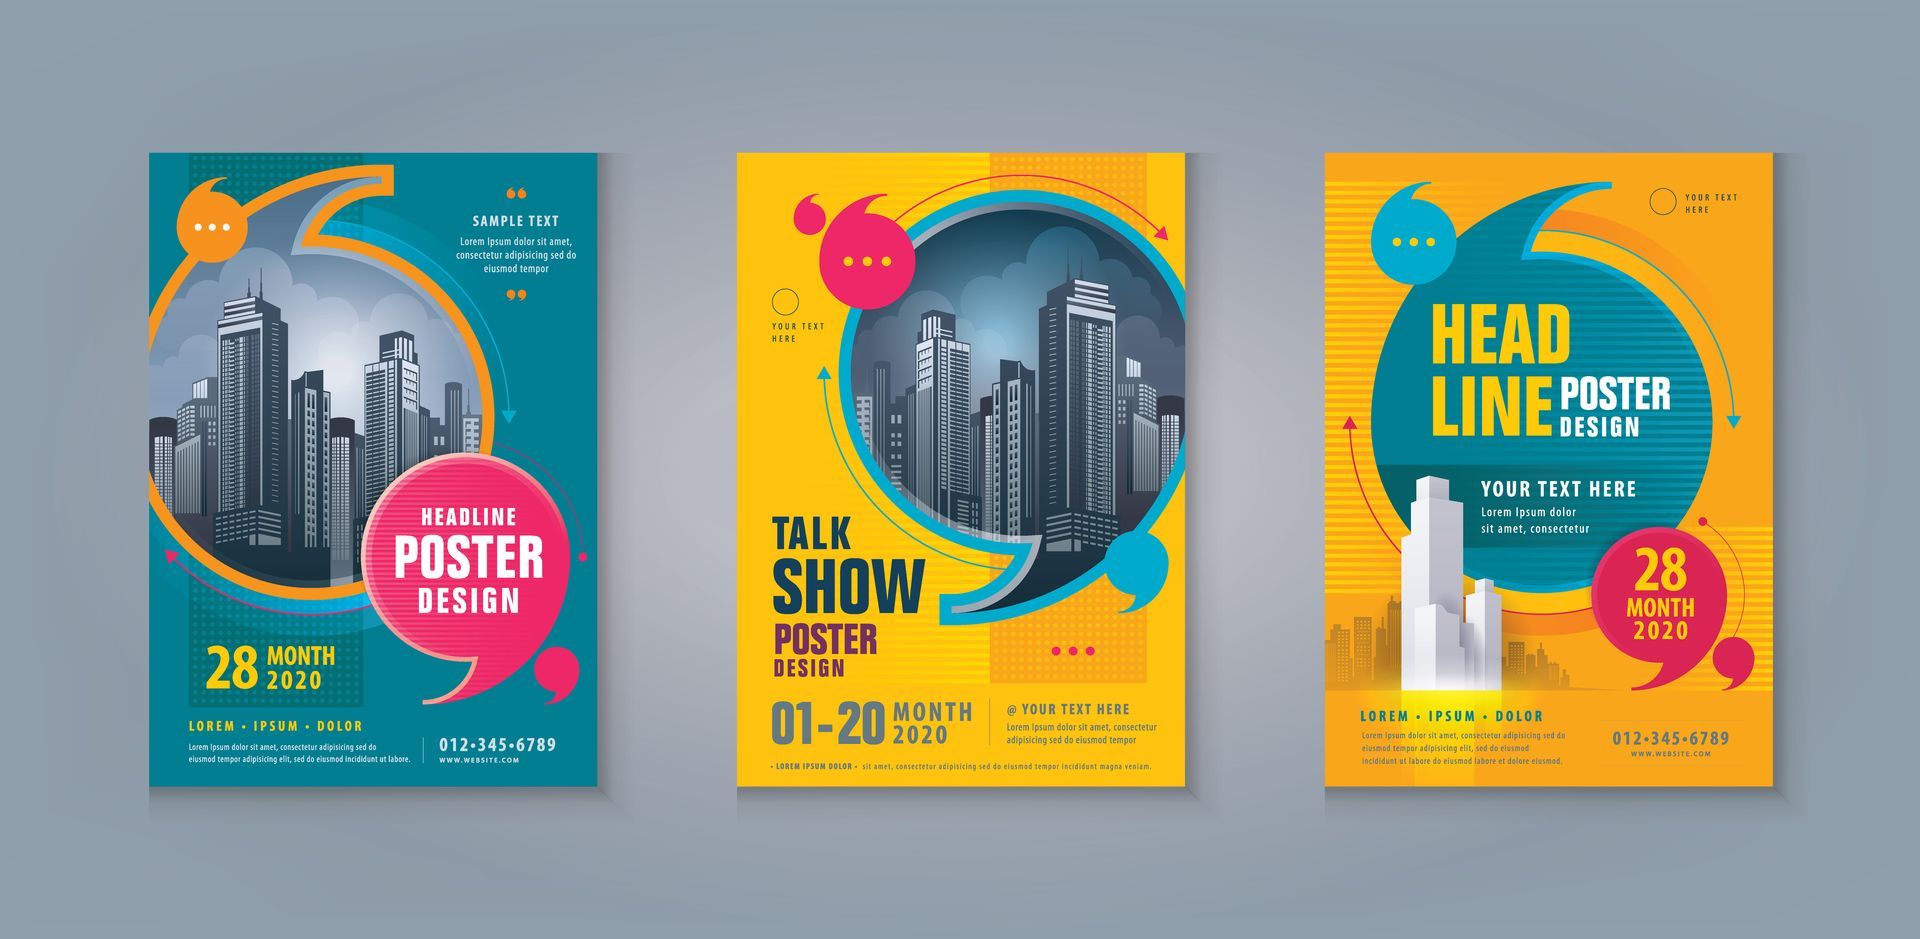 North Scottsdale Custom Posters For Conferences & Trade Shows